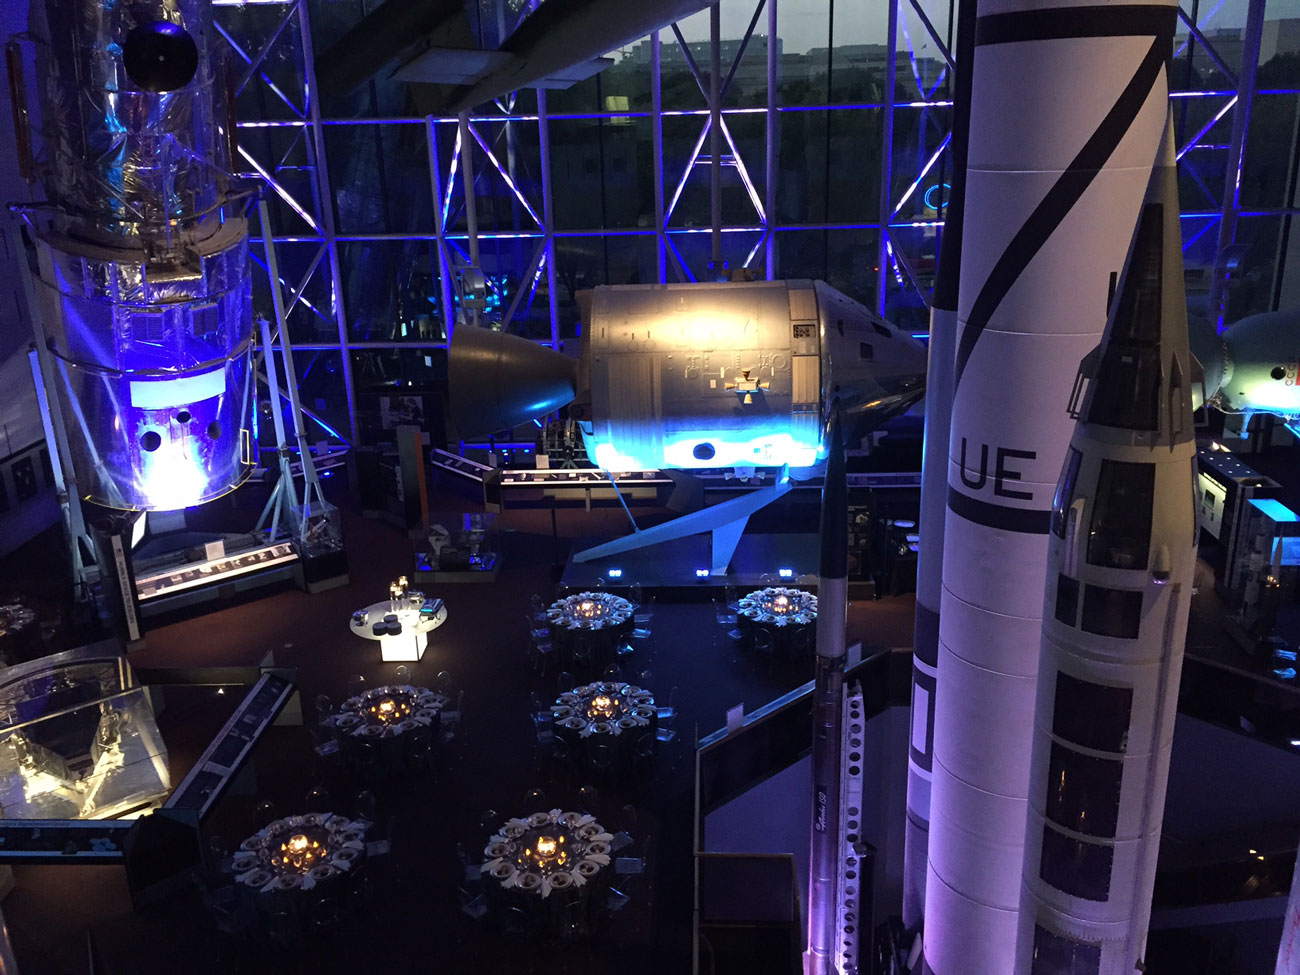 Attendees at TraceLink's NEXUS '15 enjoyed a night of food and dancing at The Smithsonian National Air and Space Museum in Washington D.C.